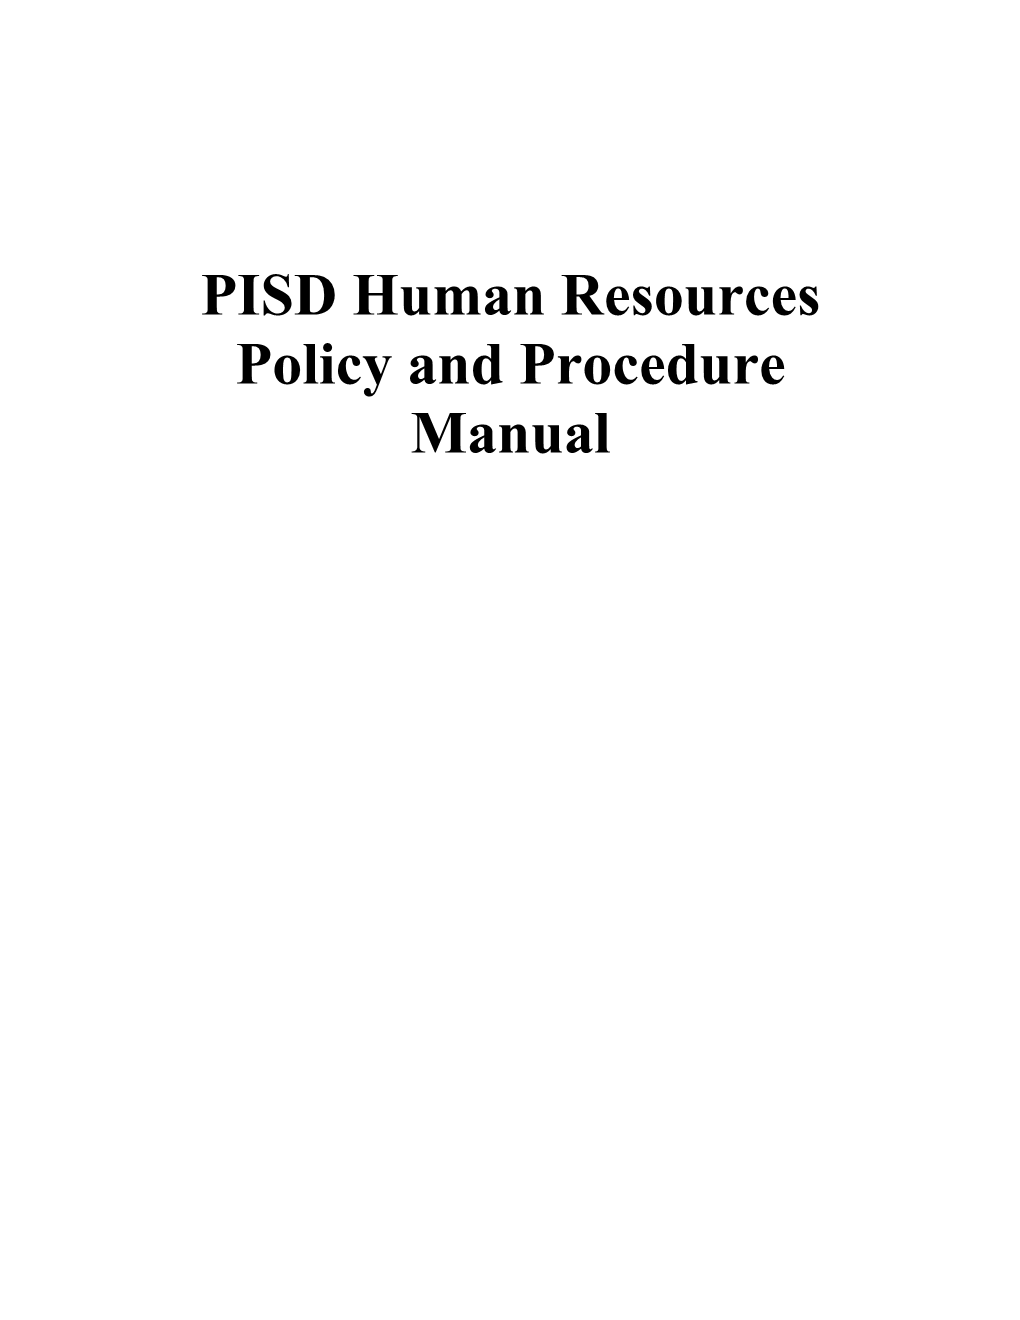 PISD Human Resources Policy and Procedure Manual